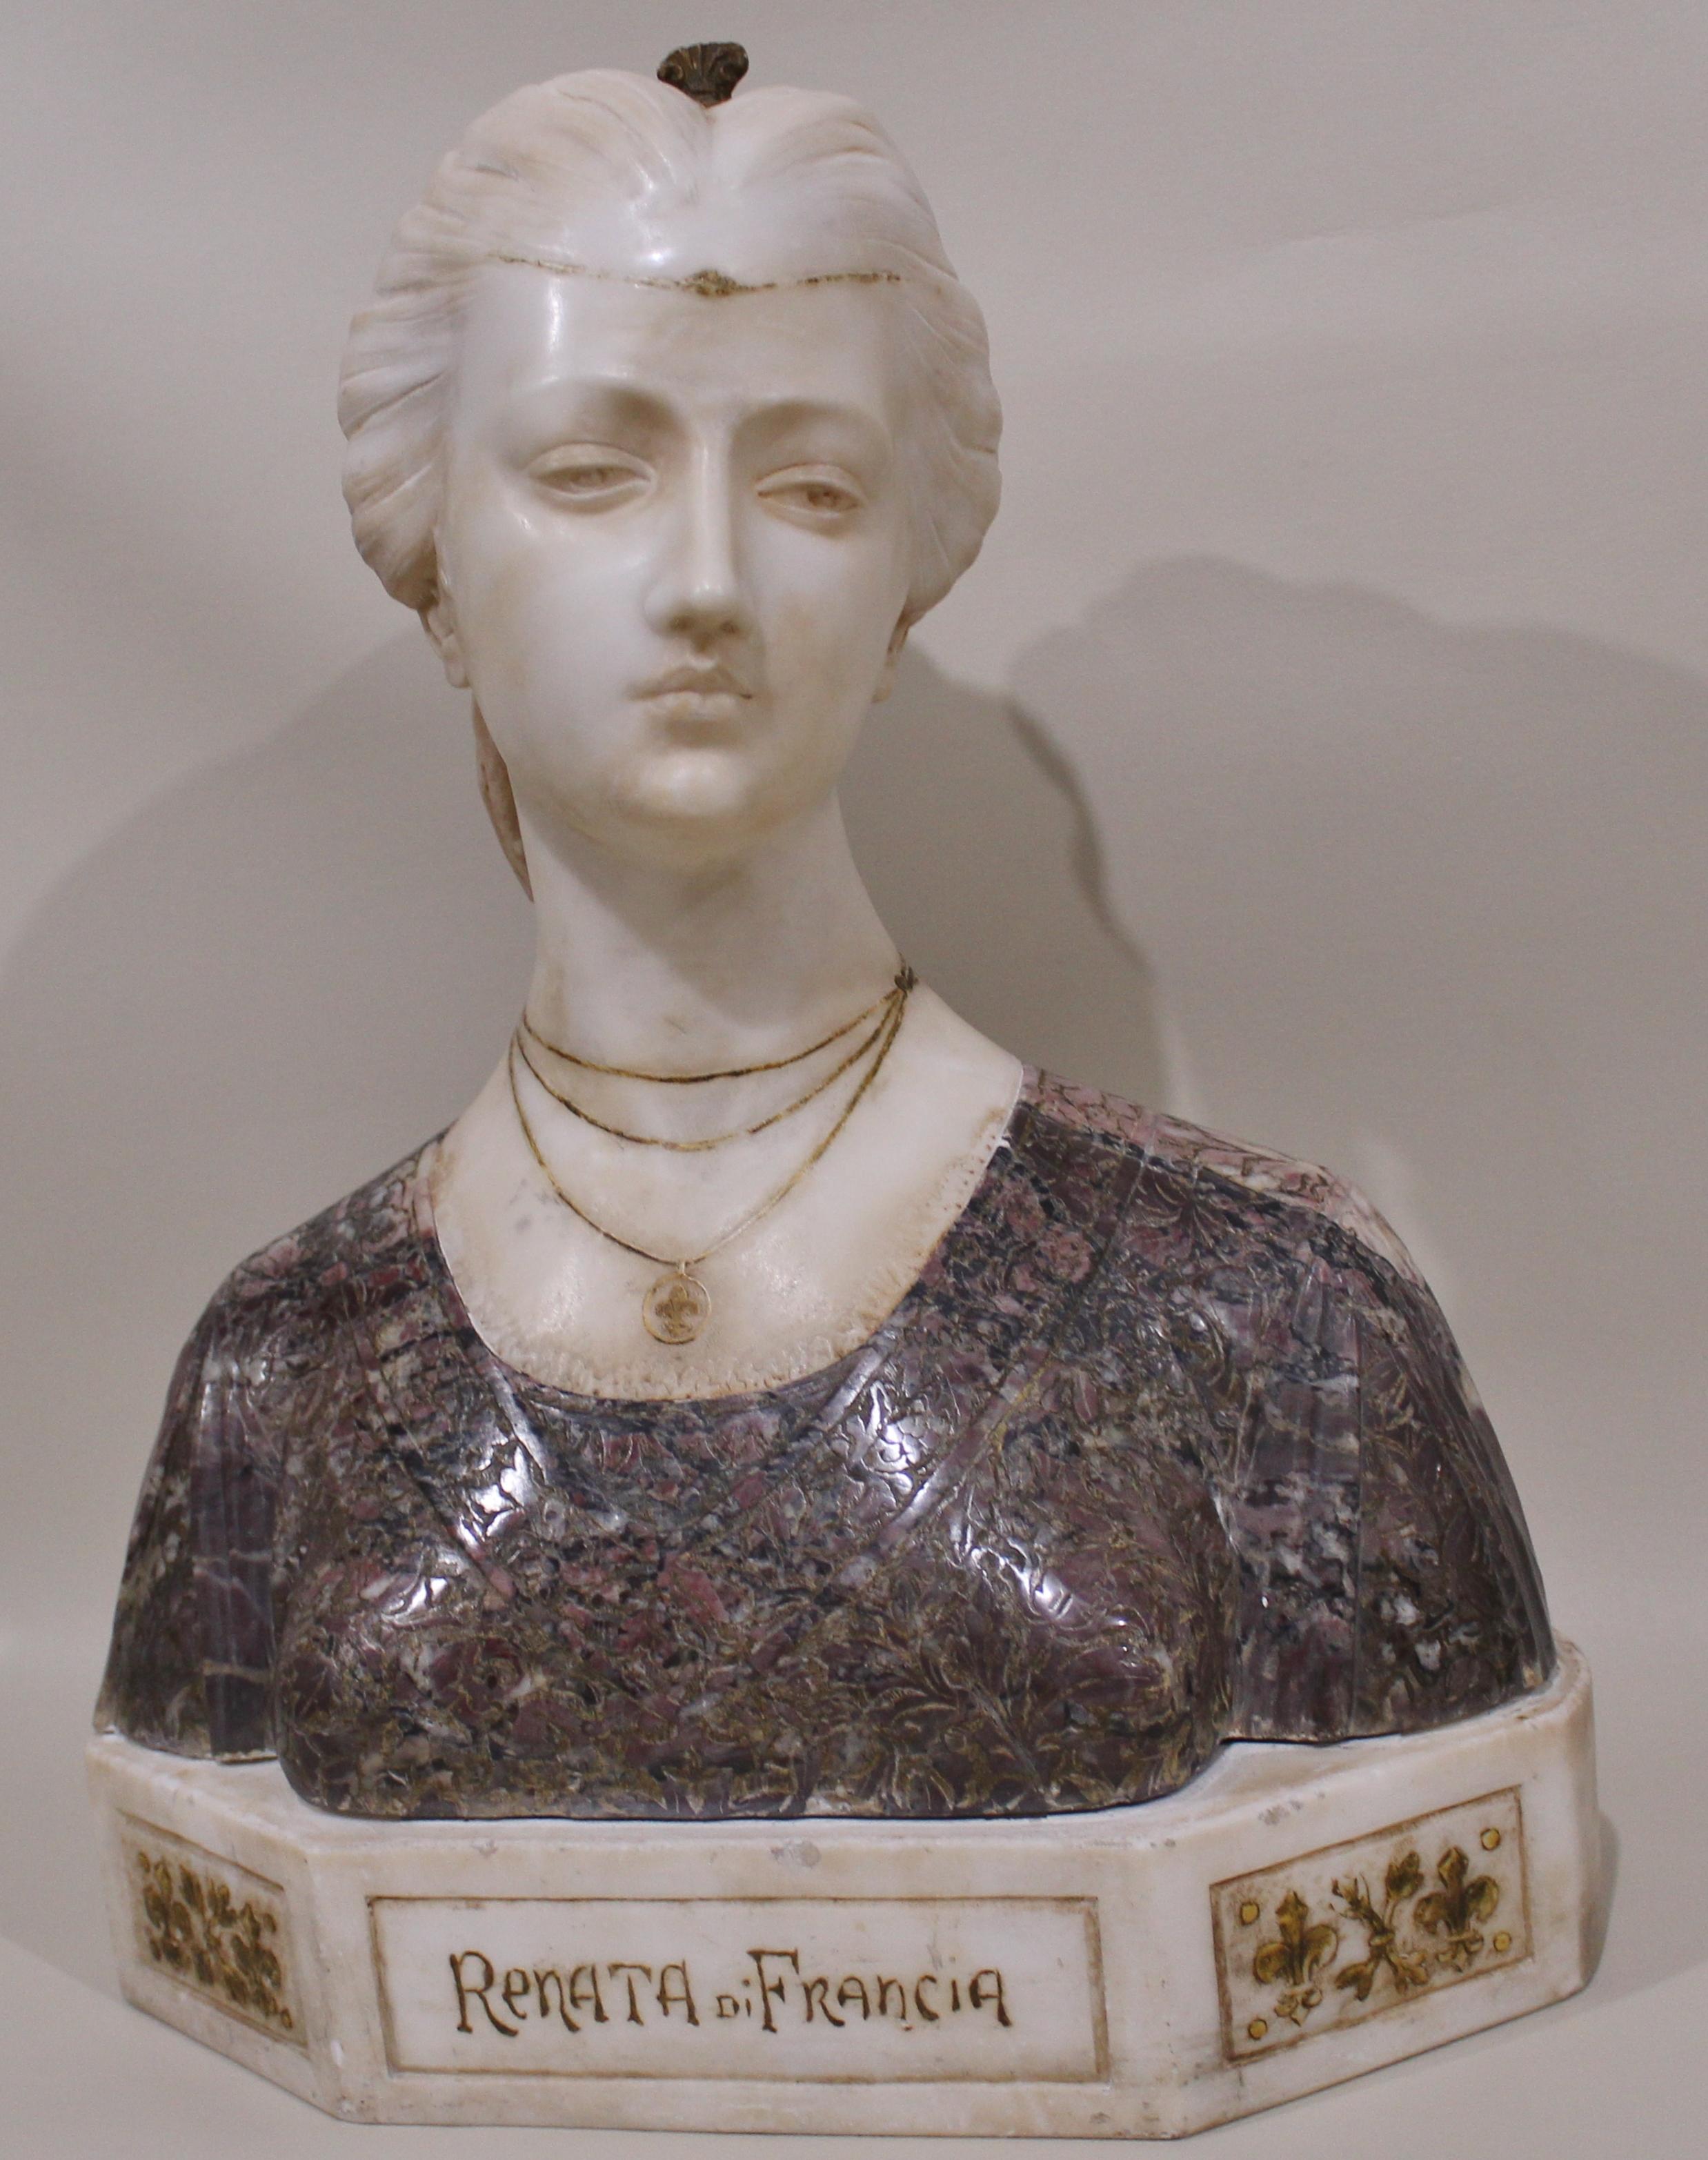 Antique carved alabaster bust depicting the Duchess of Ferrara, Renata Di Francia. The lower body of the bust may be composed of marble or other hard stone, but is of a different material than the head and neck respectively. The bust sits on a